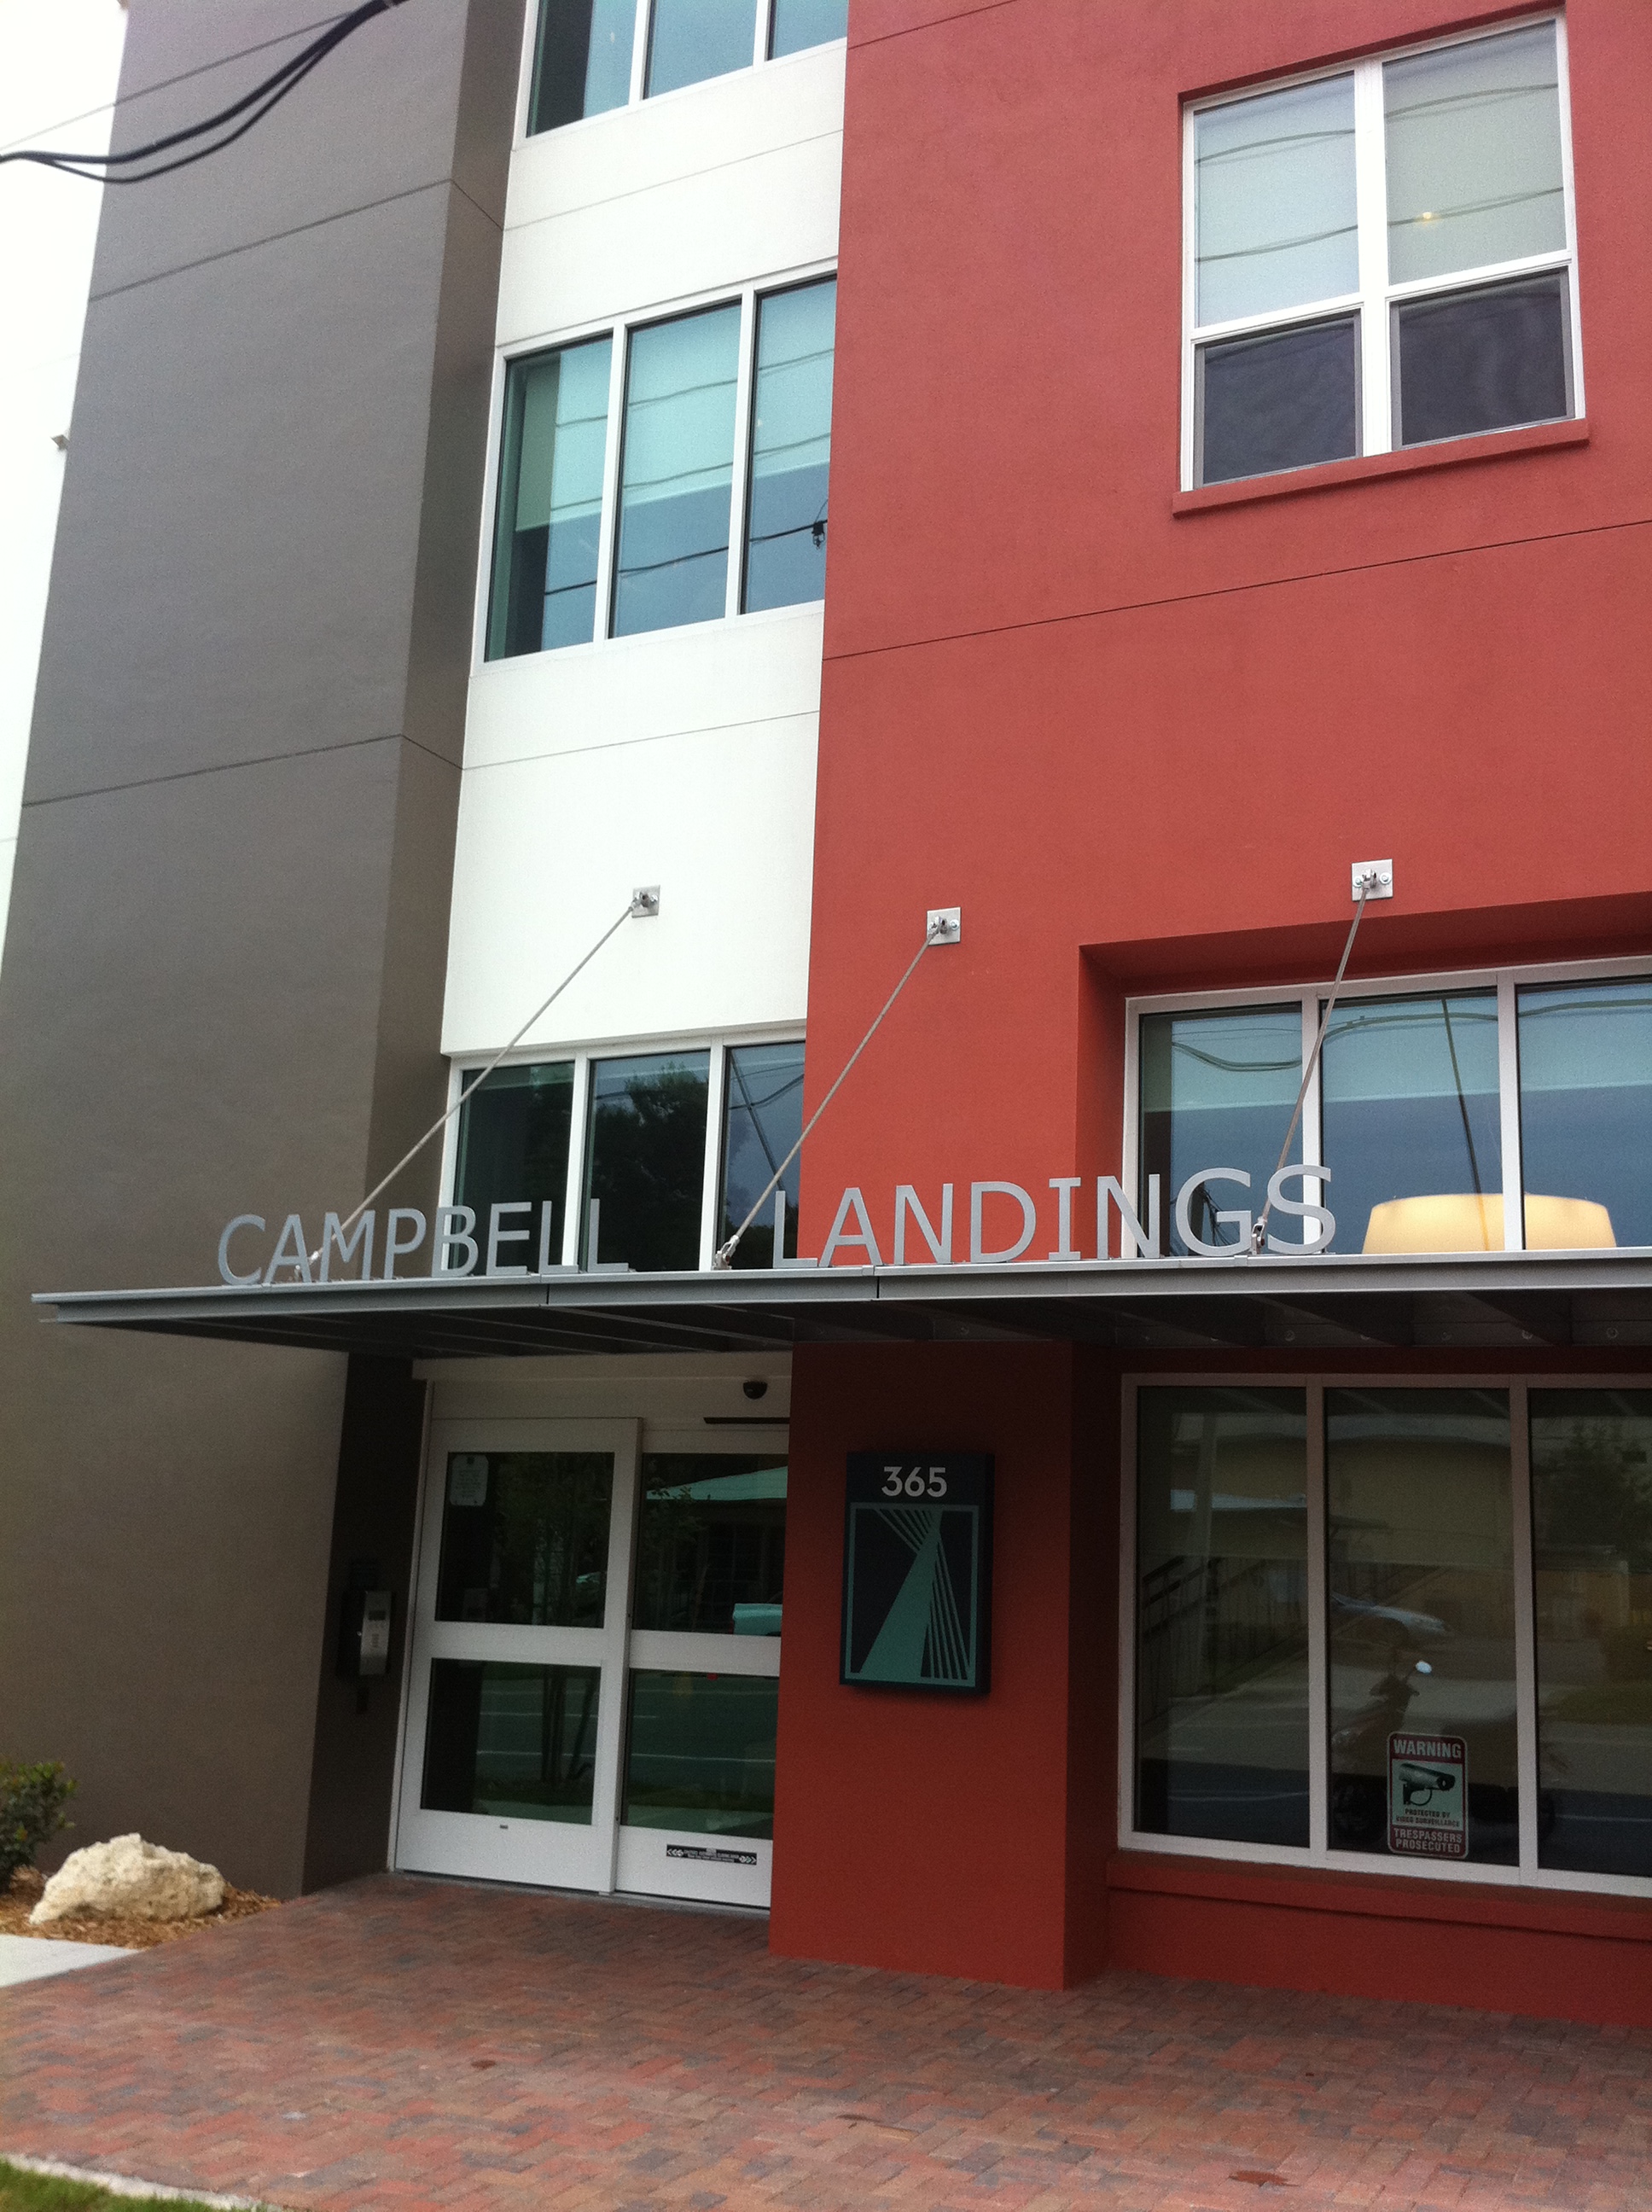 Campbell Landings Apartments